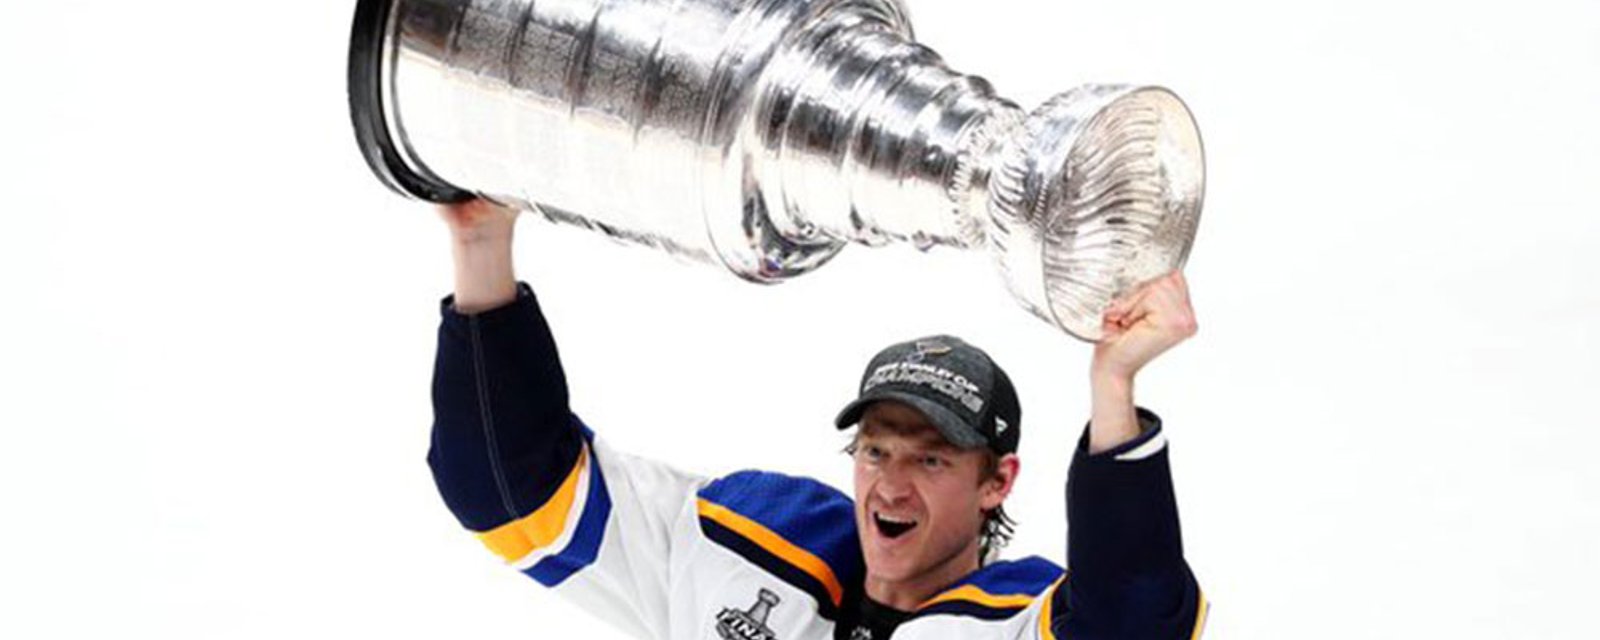 The hockey world comes together to support Jay Bouwmeester